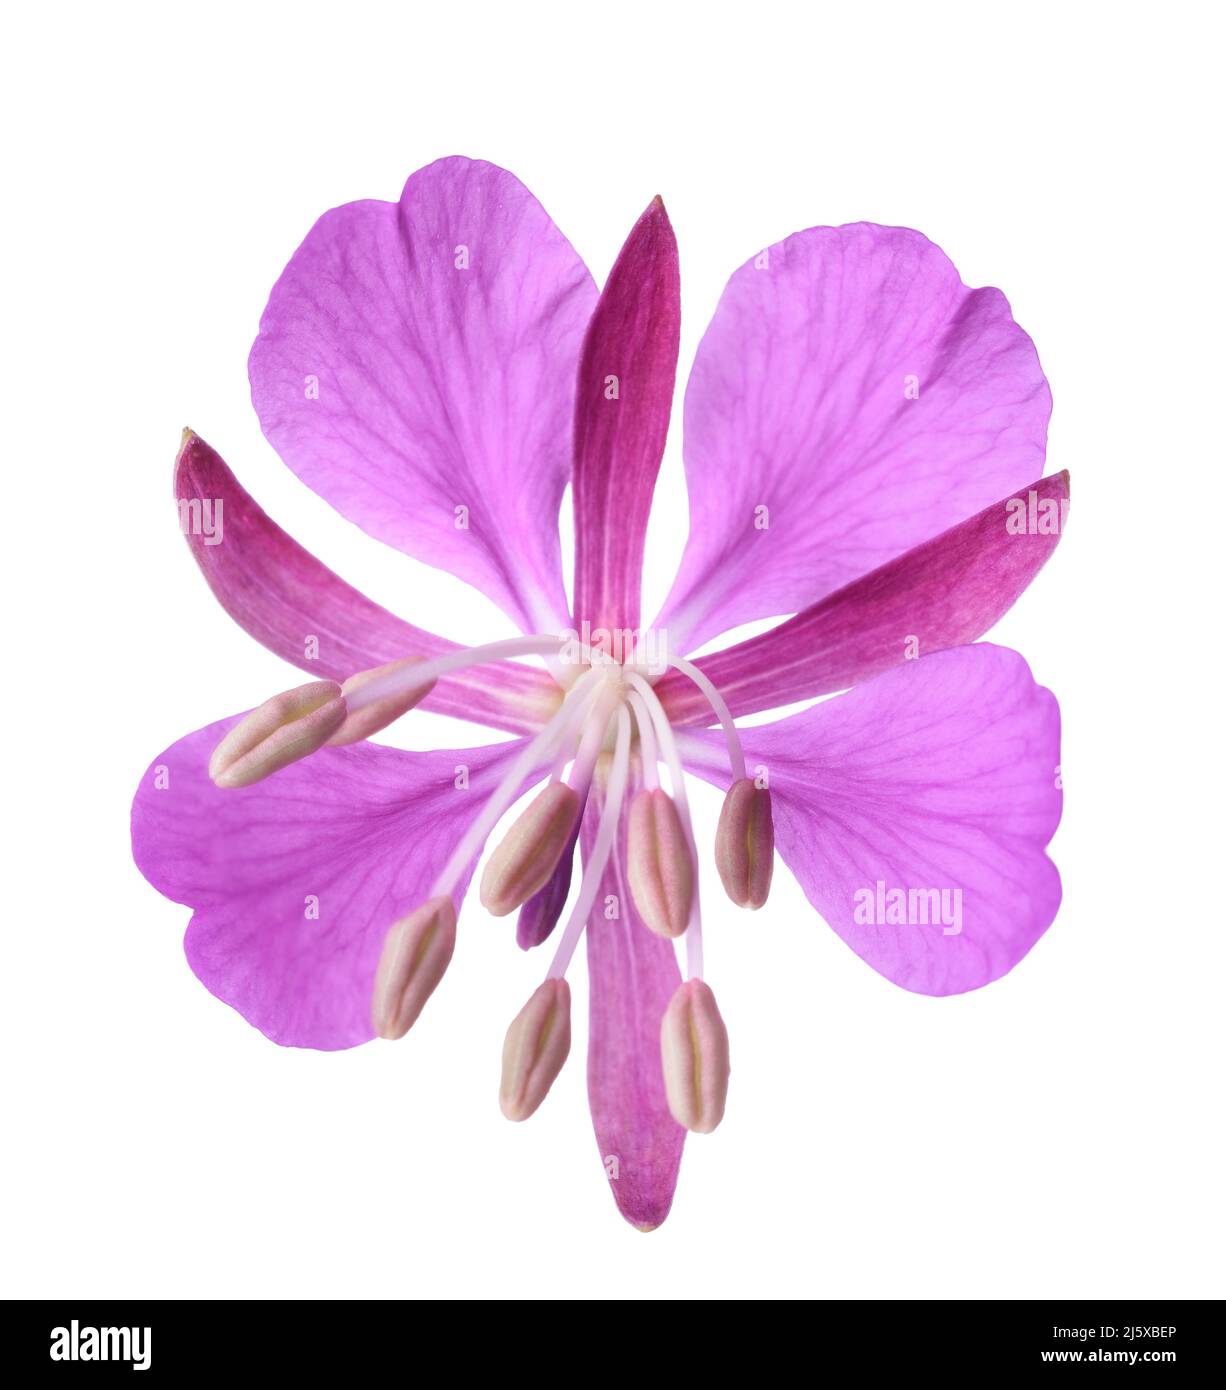 Willow Herb flower head isolated on white background Stock Photo